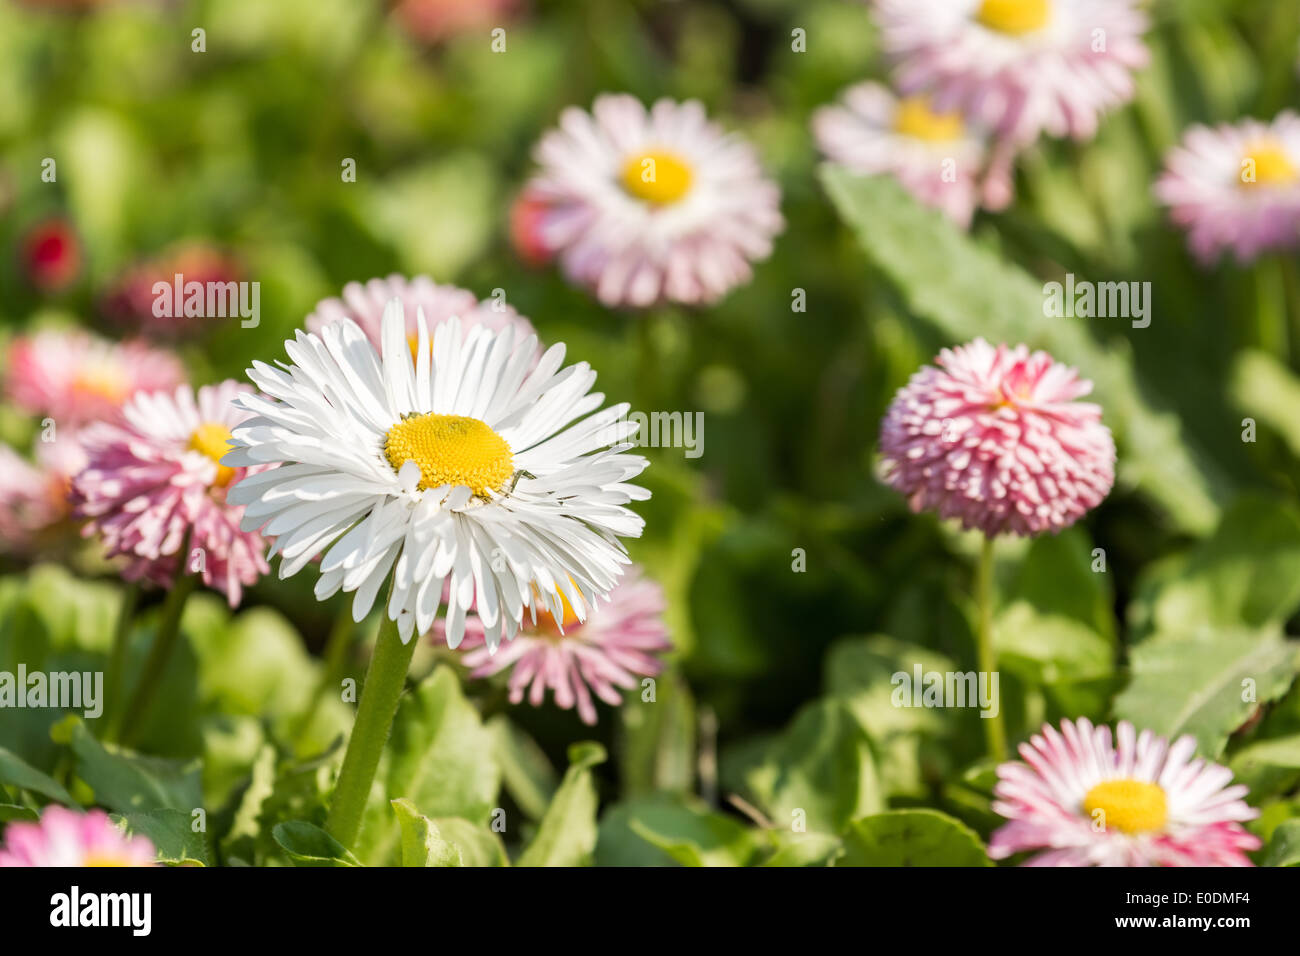 White Daisy In Pink Daisy Flowers Field Stock Photo